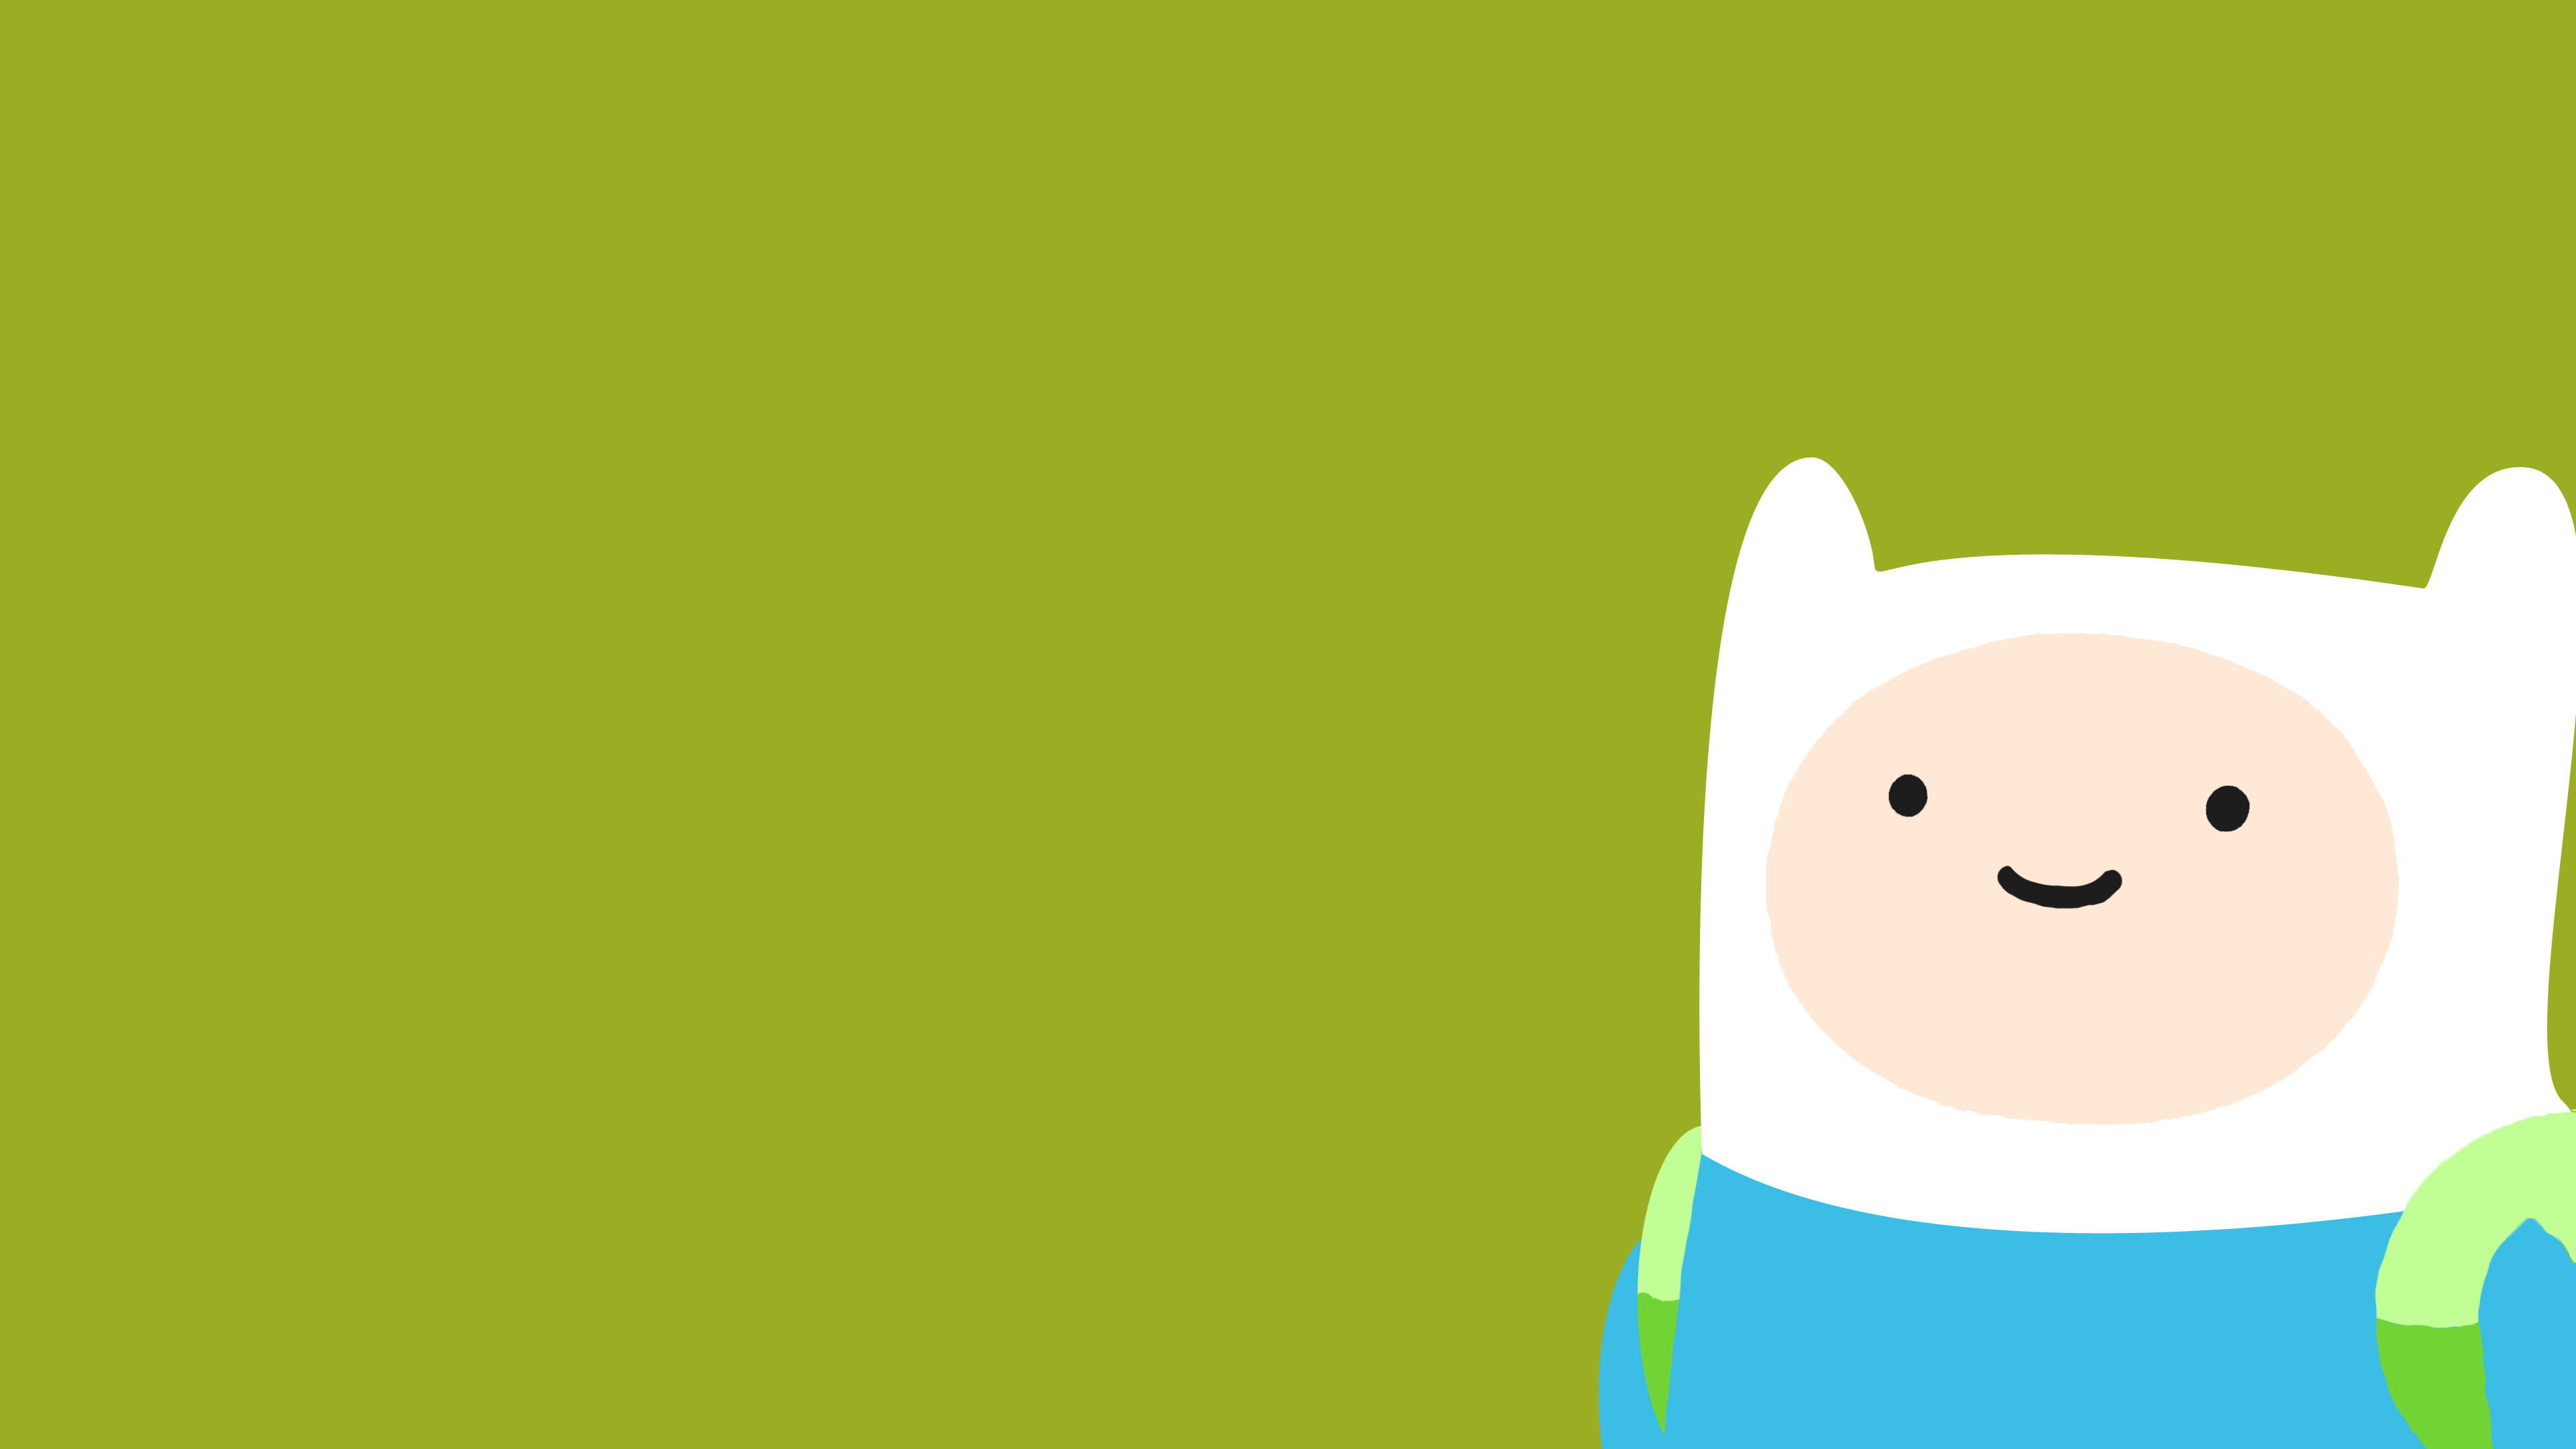 Adventure Time wallpapers, Finn character, High definition, Animated series, 3840x2160 4K Desktop